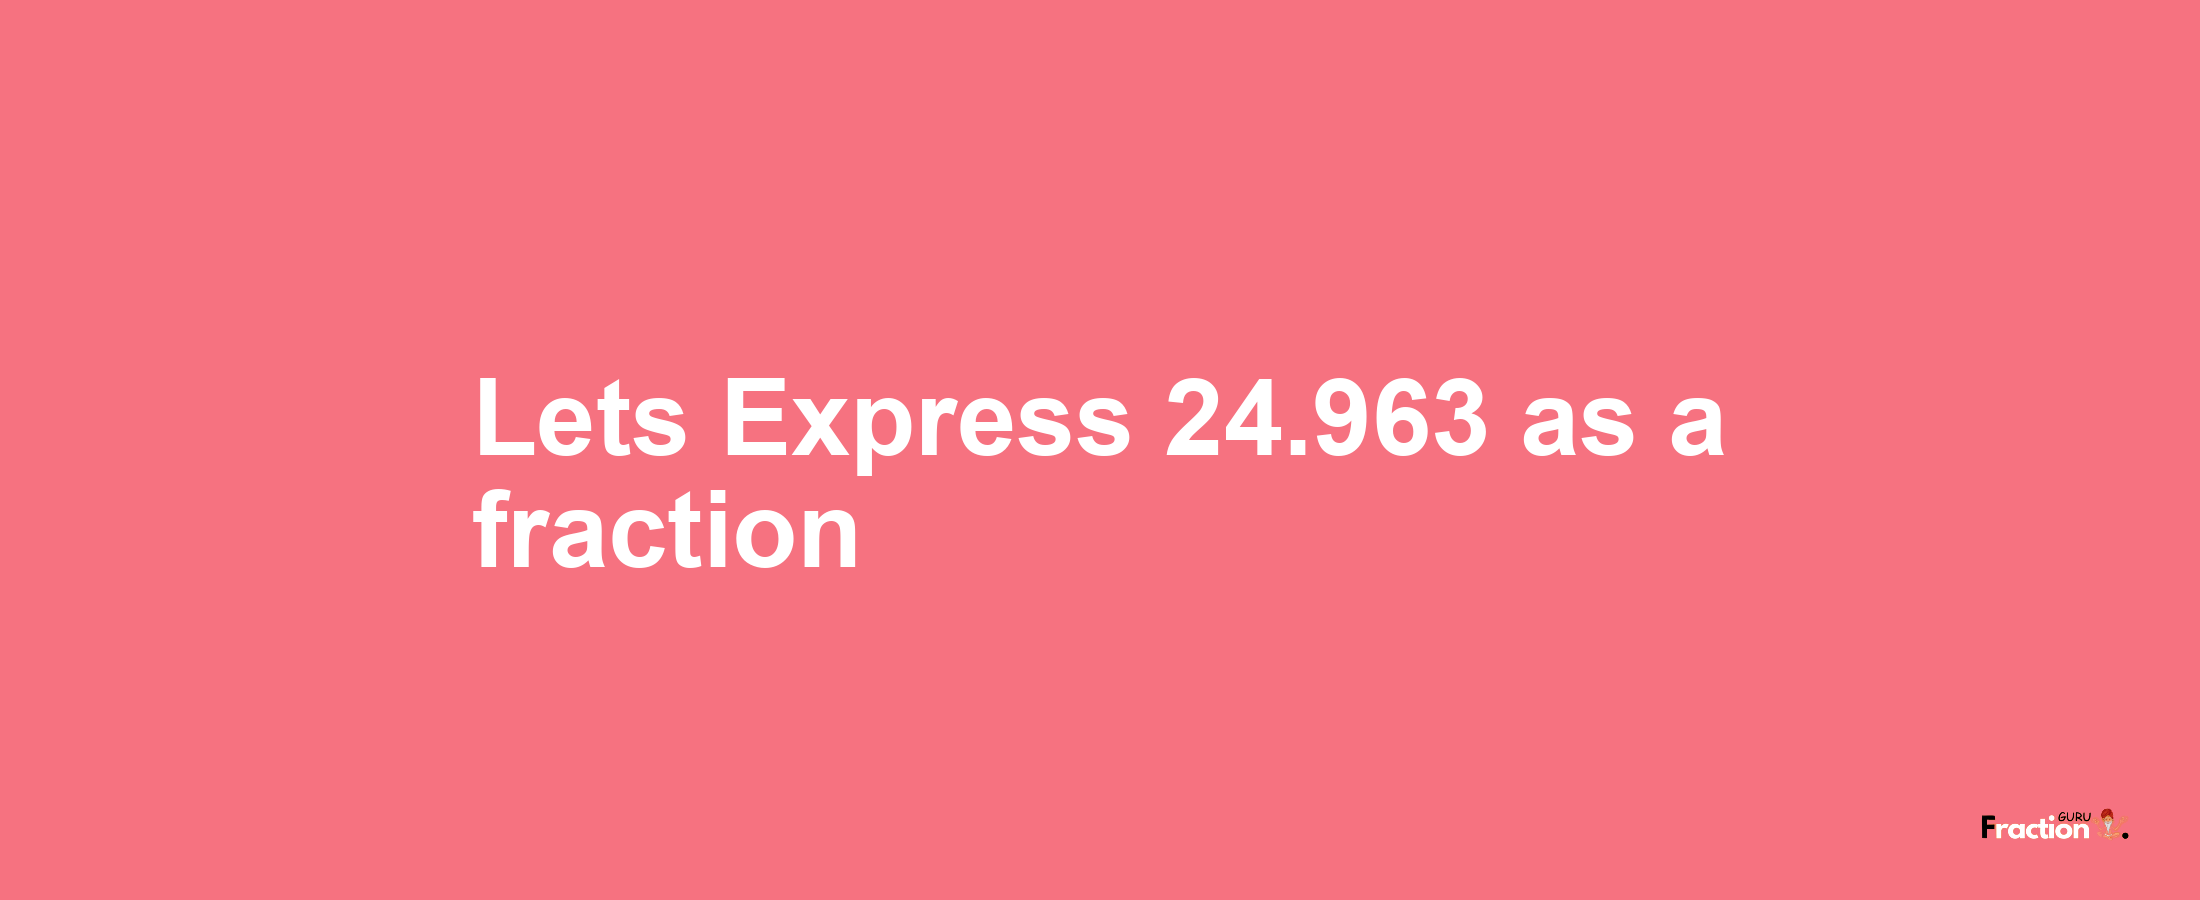 Lets Express 24.963 as afraction